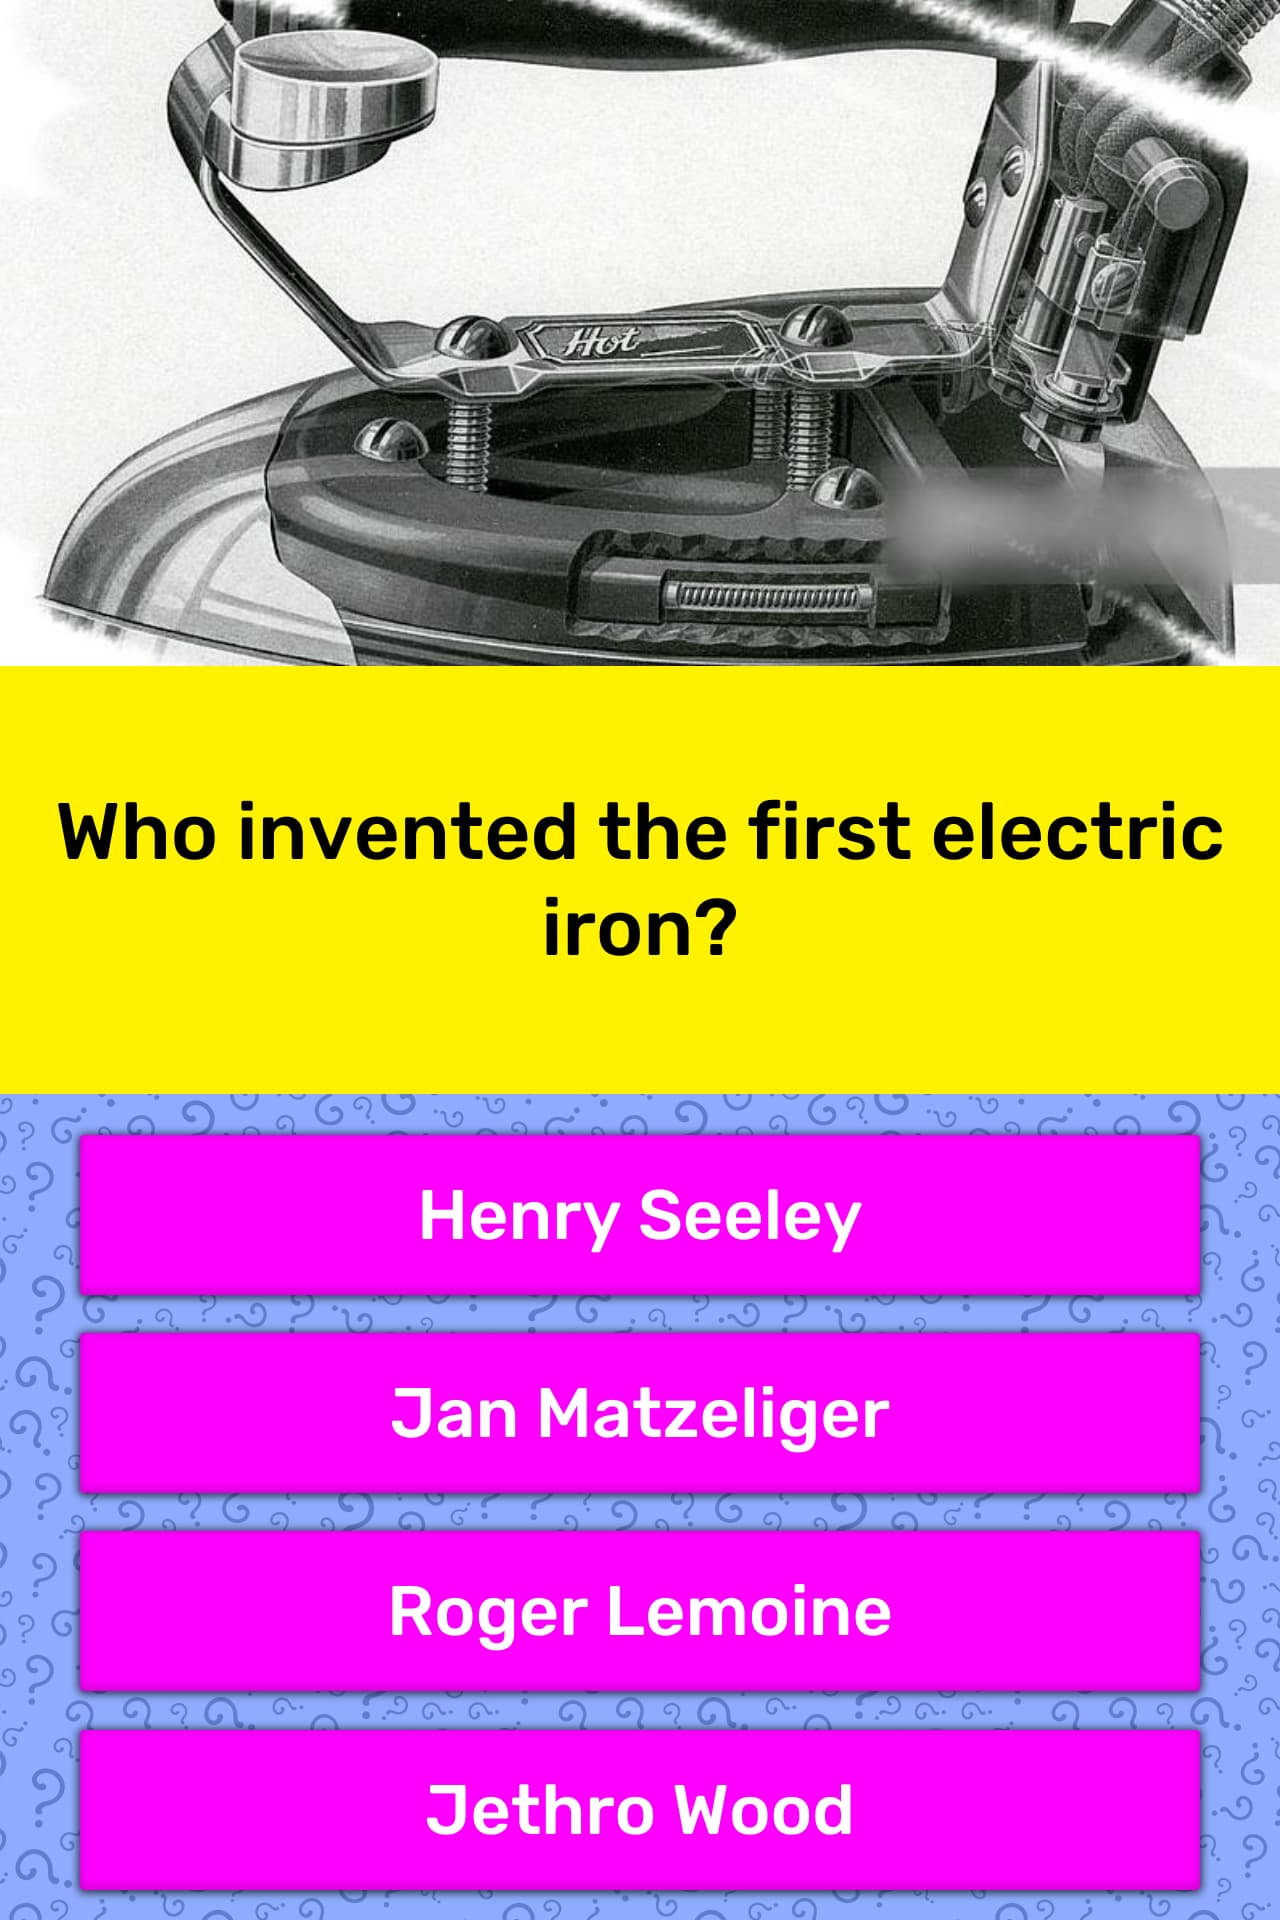 who invented the flat iron